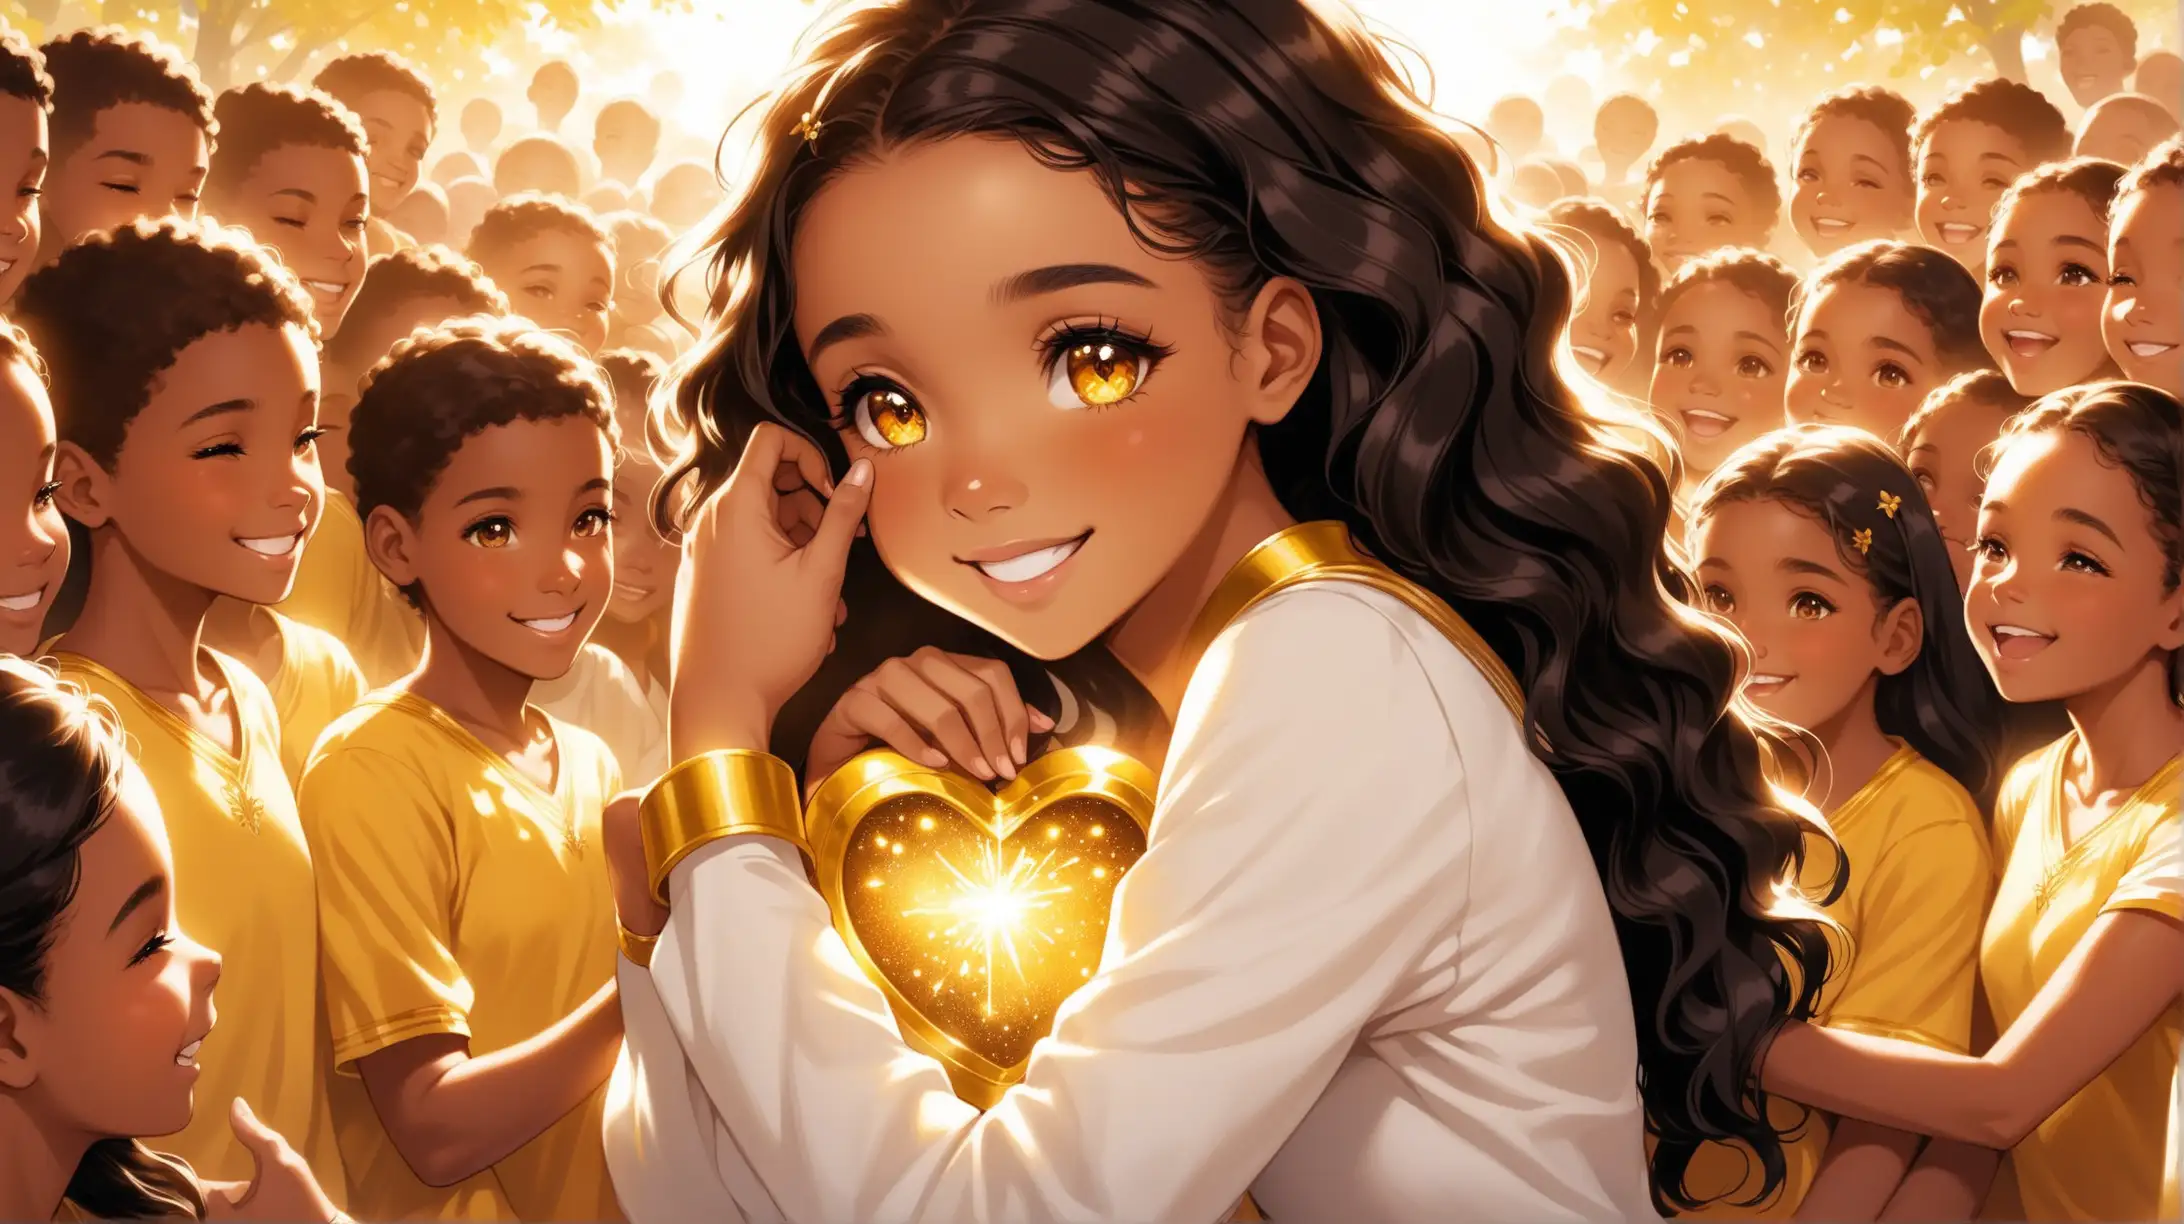  wide shot Lily a cheerful light skin ebony teen with a spark of kindness in her eyes, with people embracing each other knowing that the greatest treasure of all was found in the hearts of those who embraced the Golden Rule